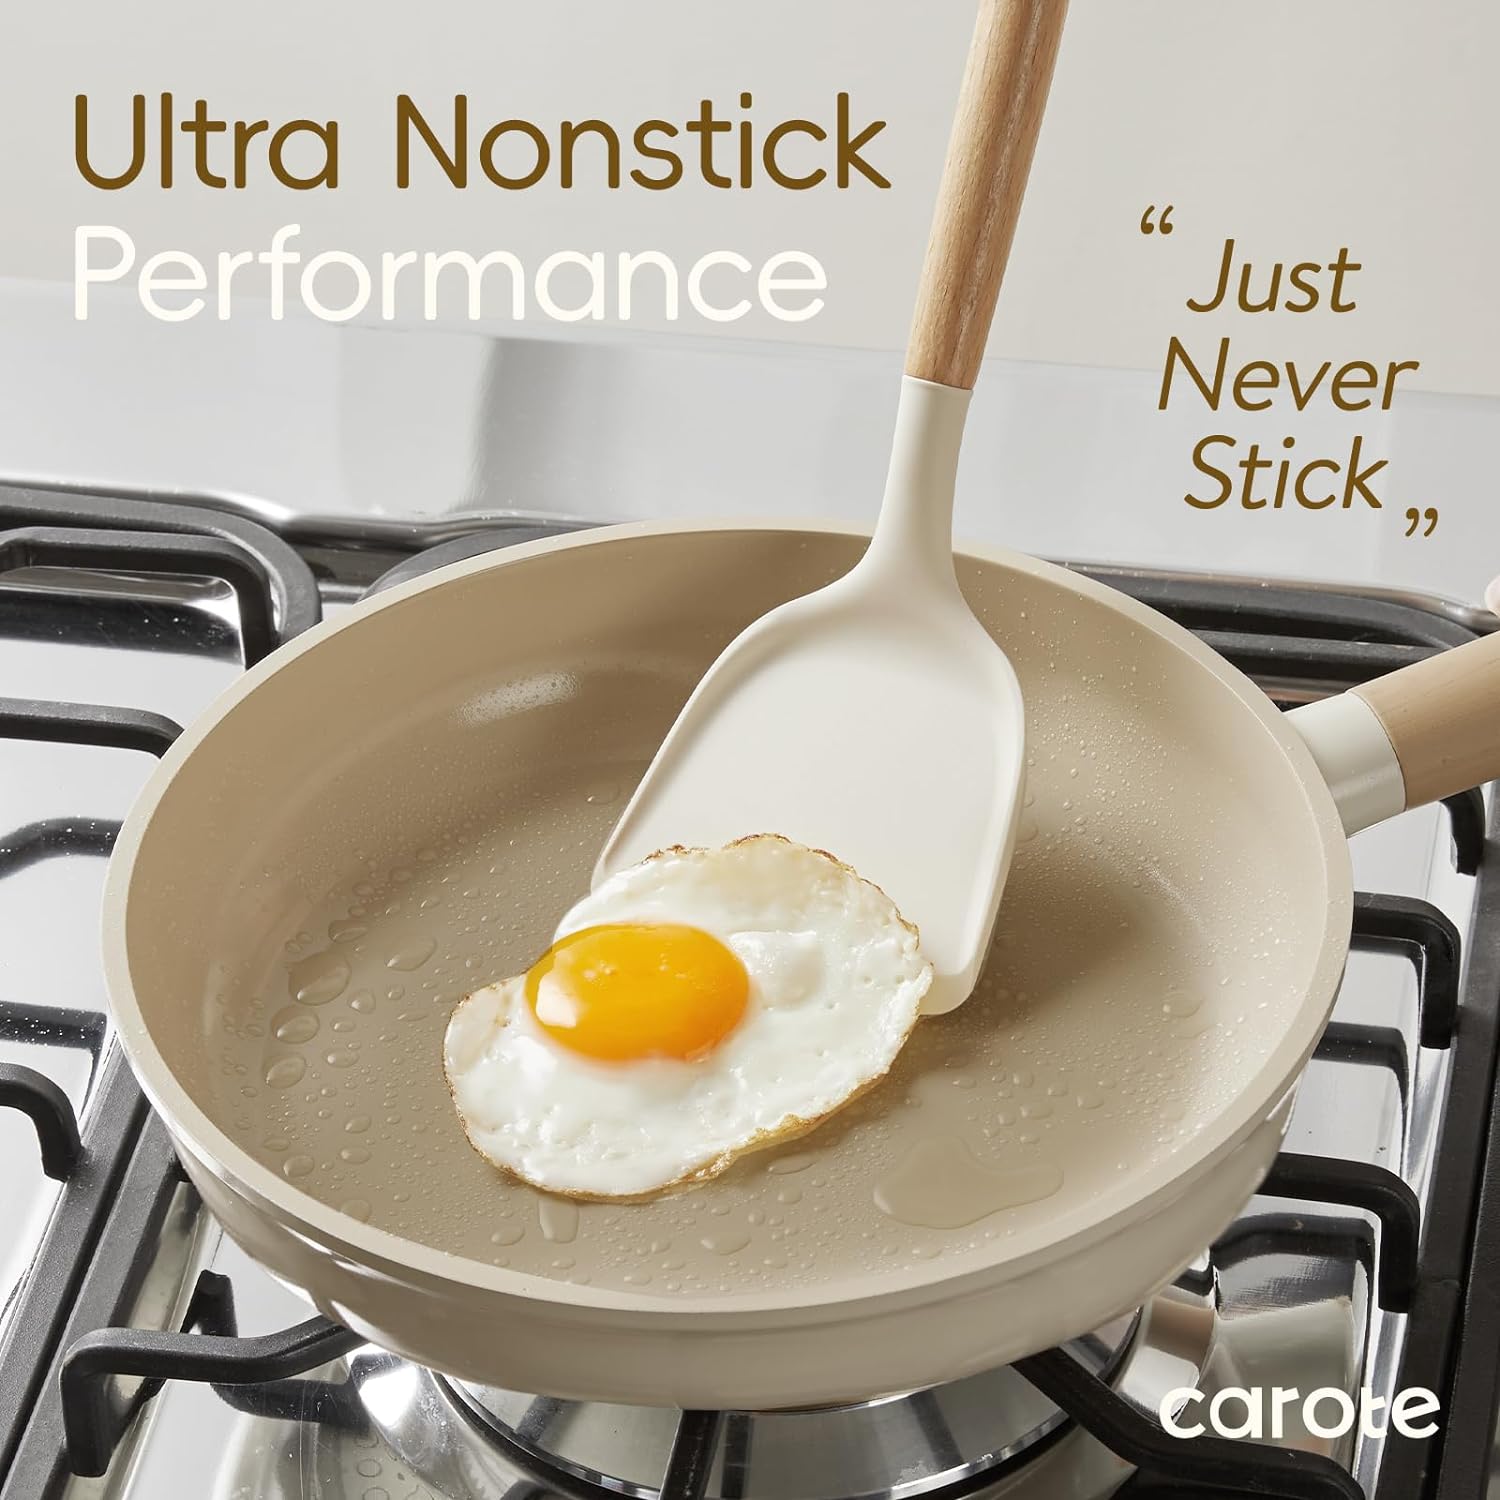 Ceramic Cookware Sets Feature